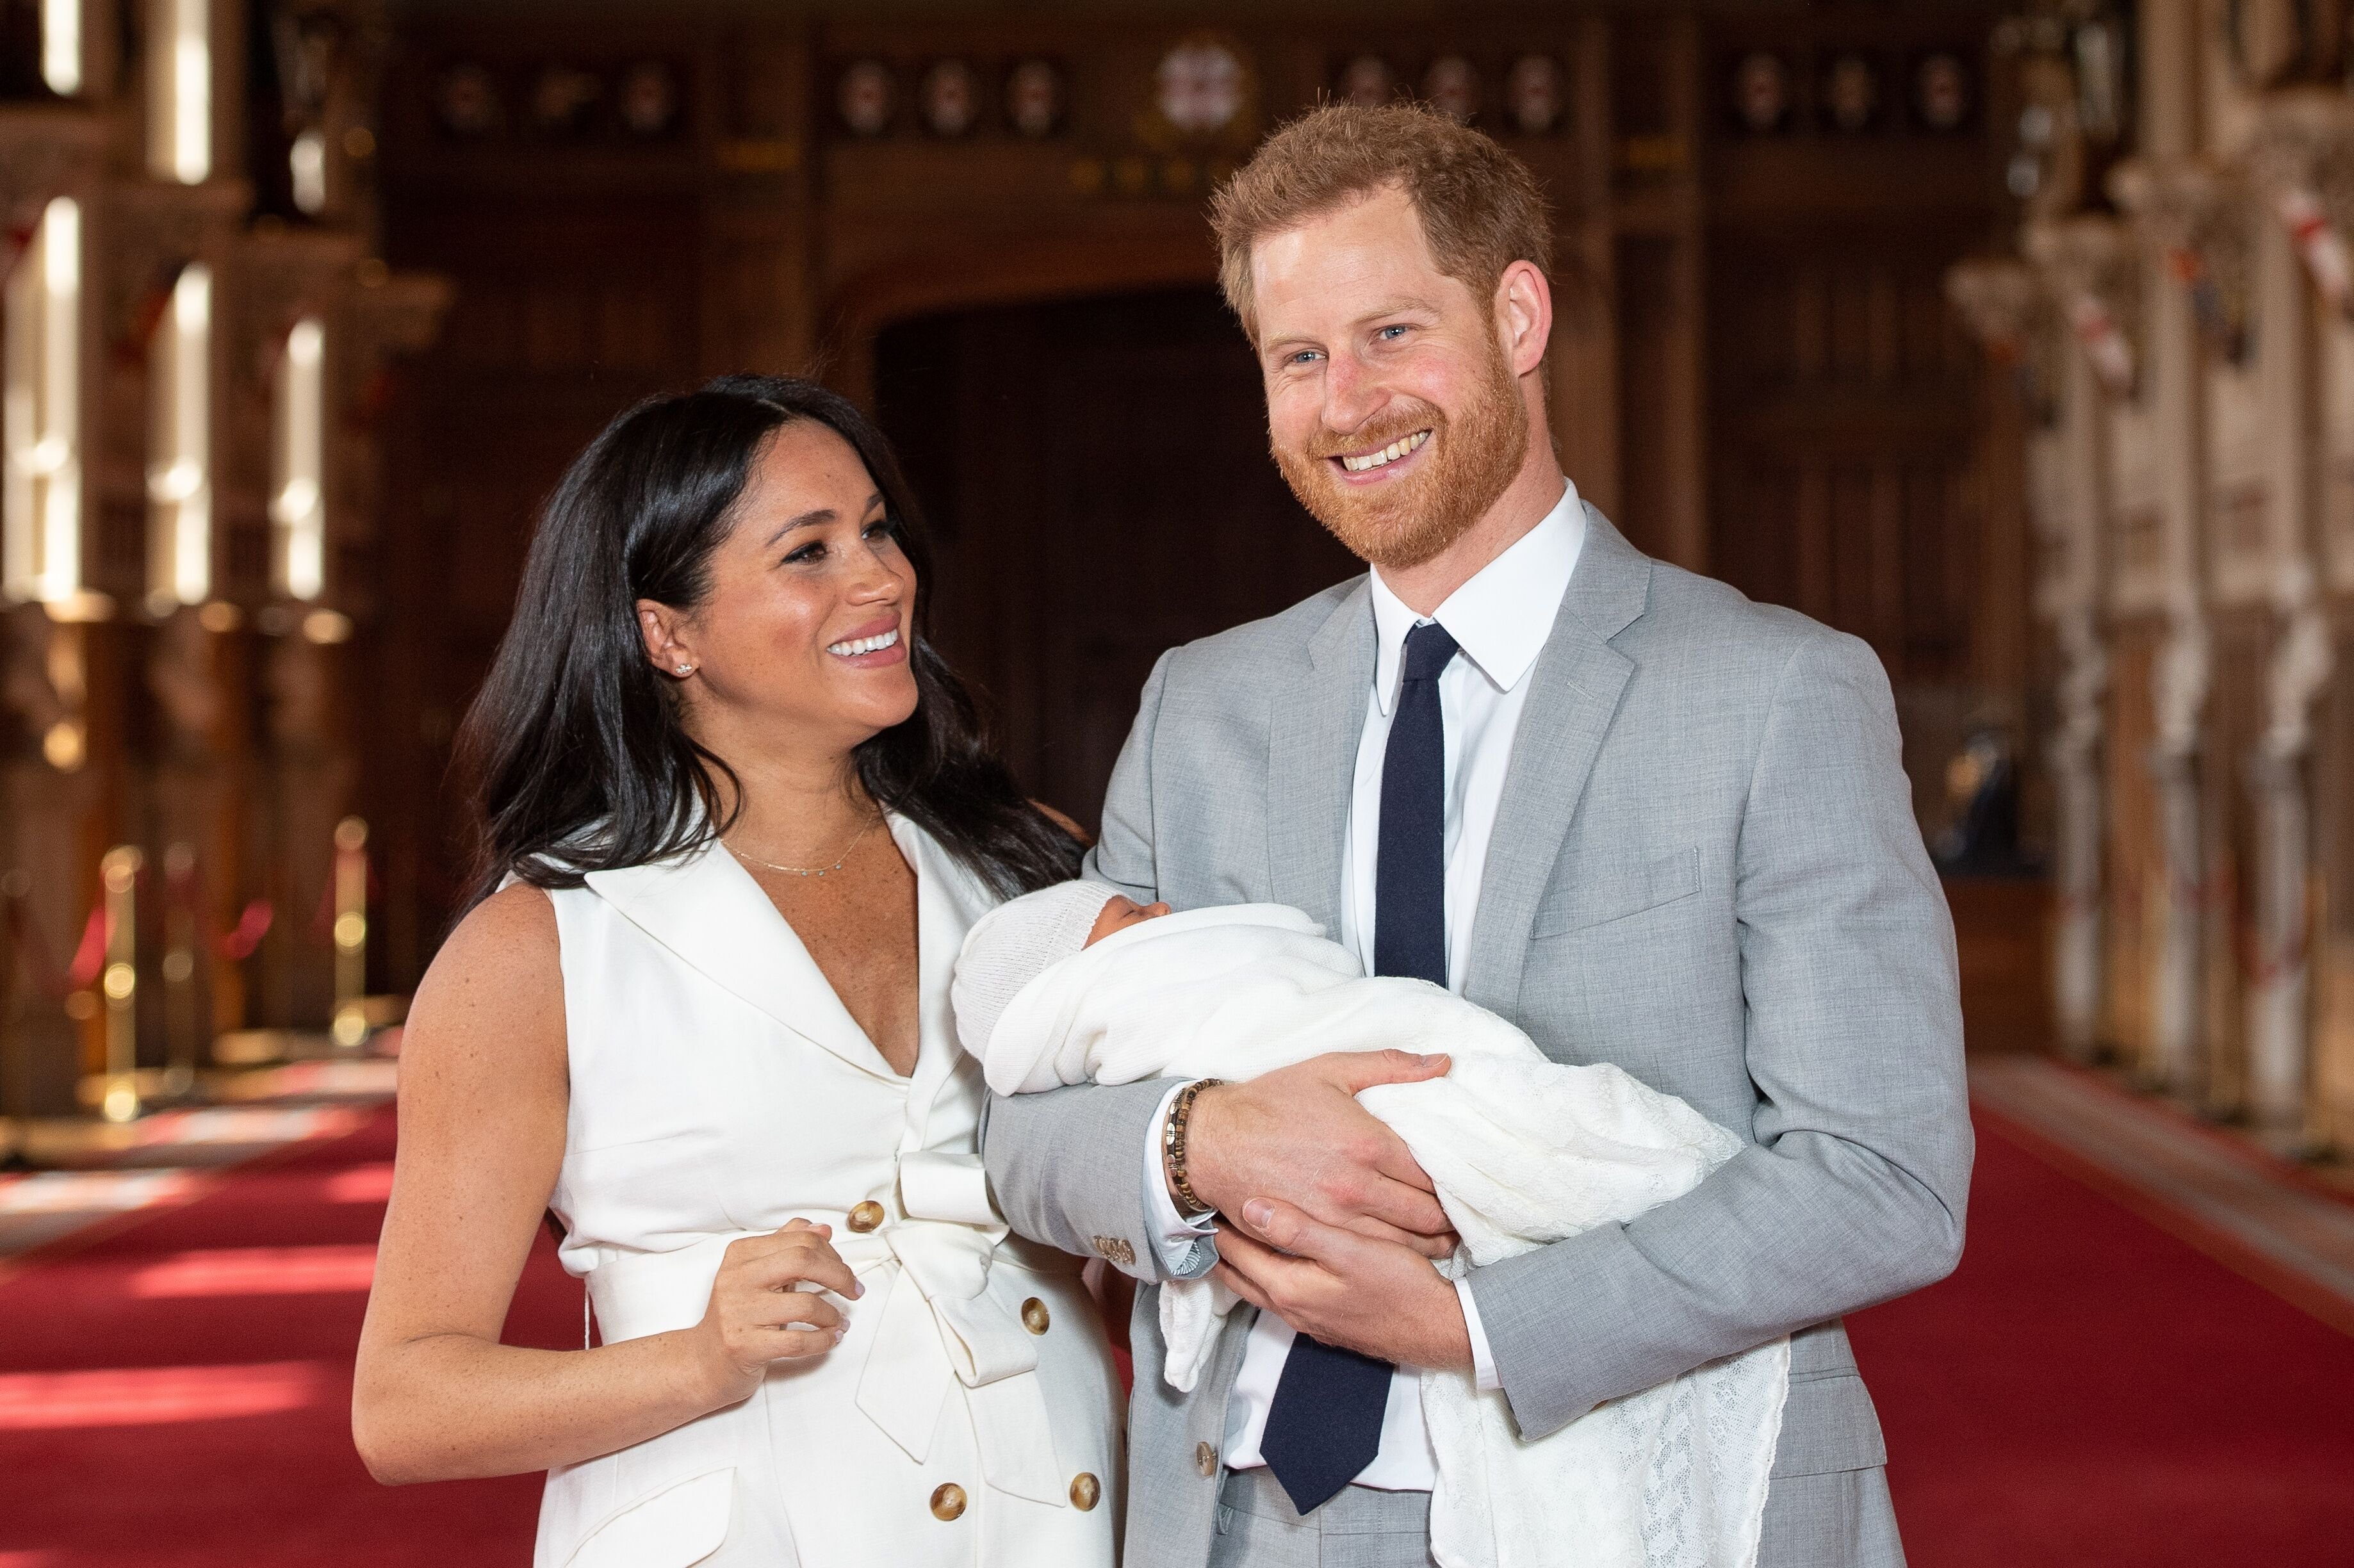 Prince Harry and Duchess Meghan pose with their newborn son Archie Harrison Mountbatten-Windsor during a photocall in St George's Hall at Windsor Castle on May 8, 2019 in Windsor, England. | Source: Getty Images